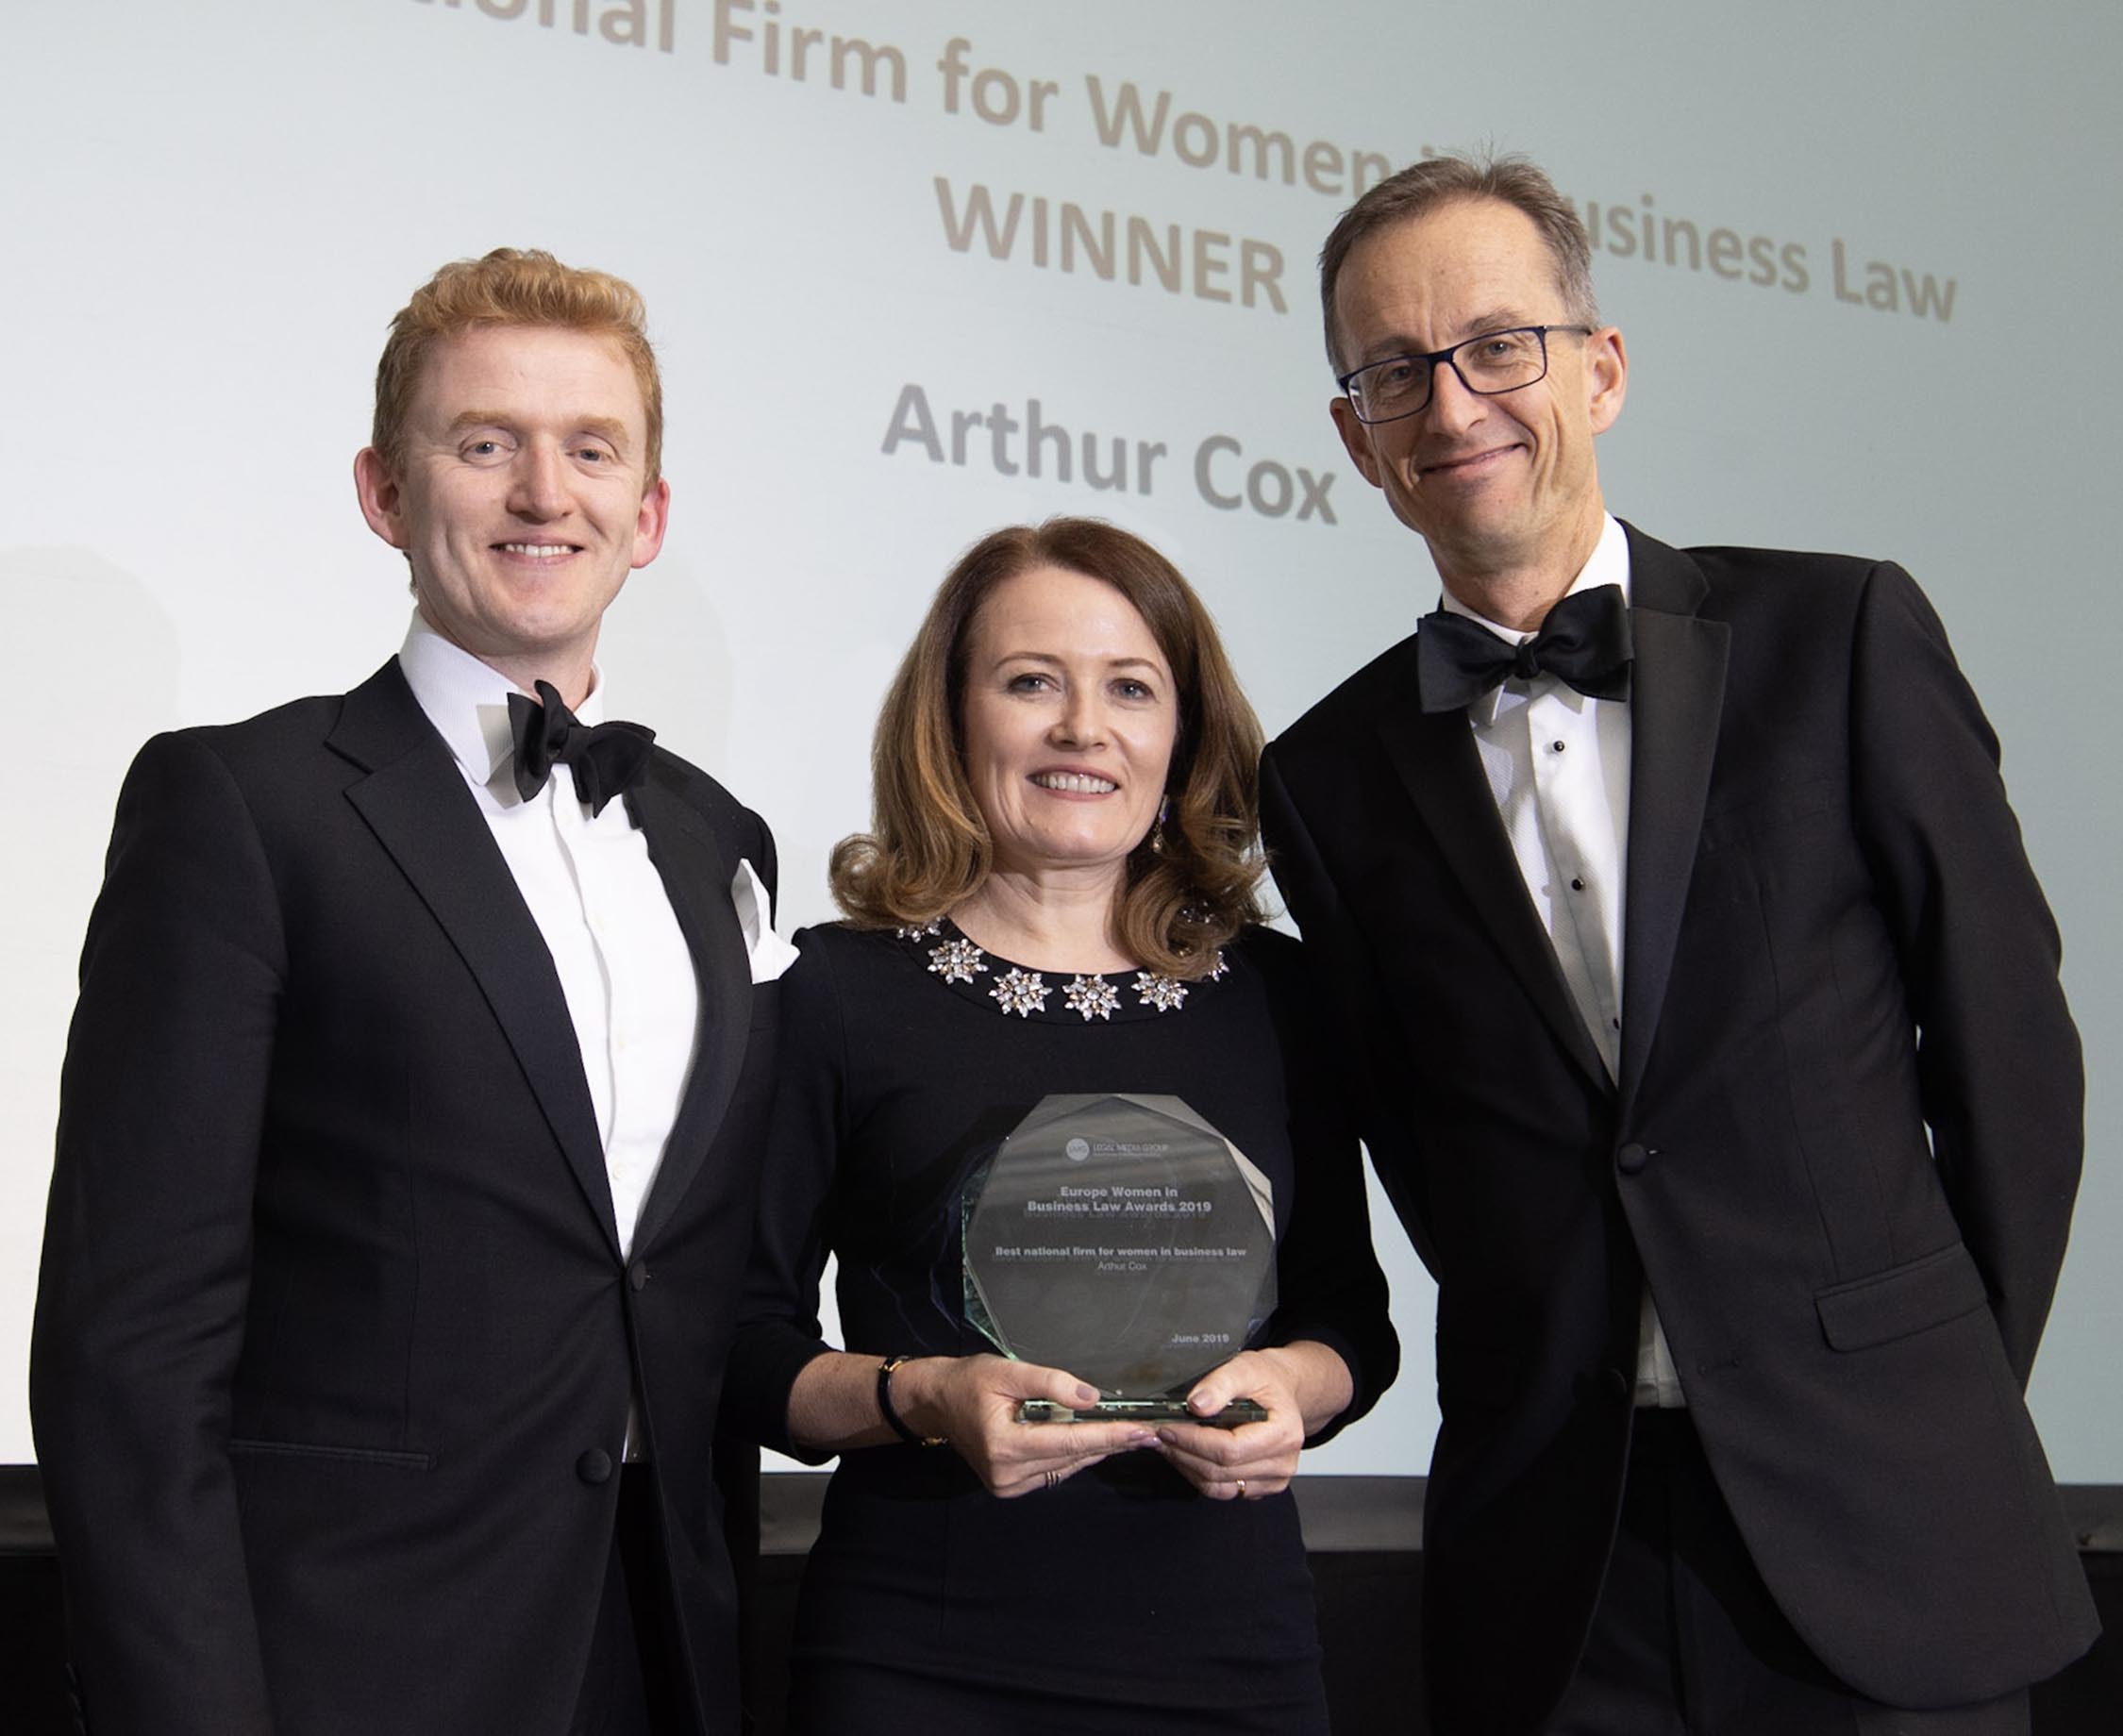 Arthur Cox recognised as leading firm for women in business law